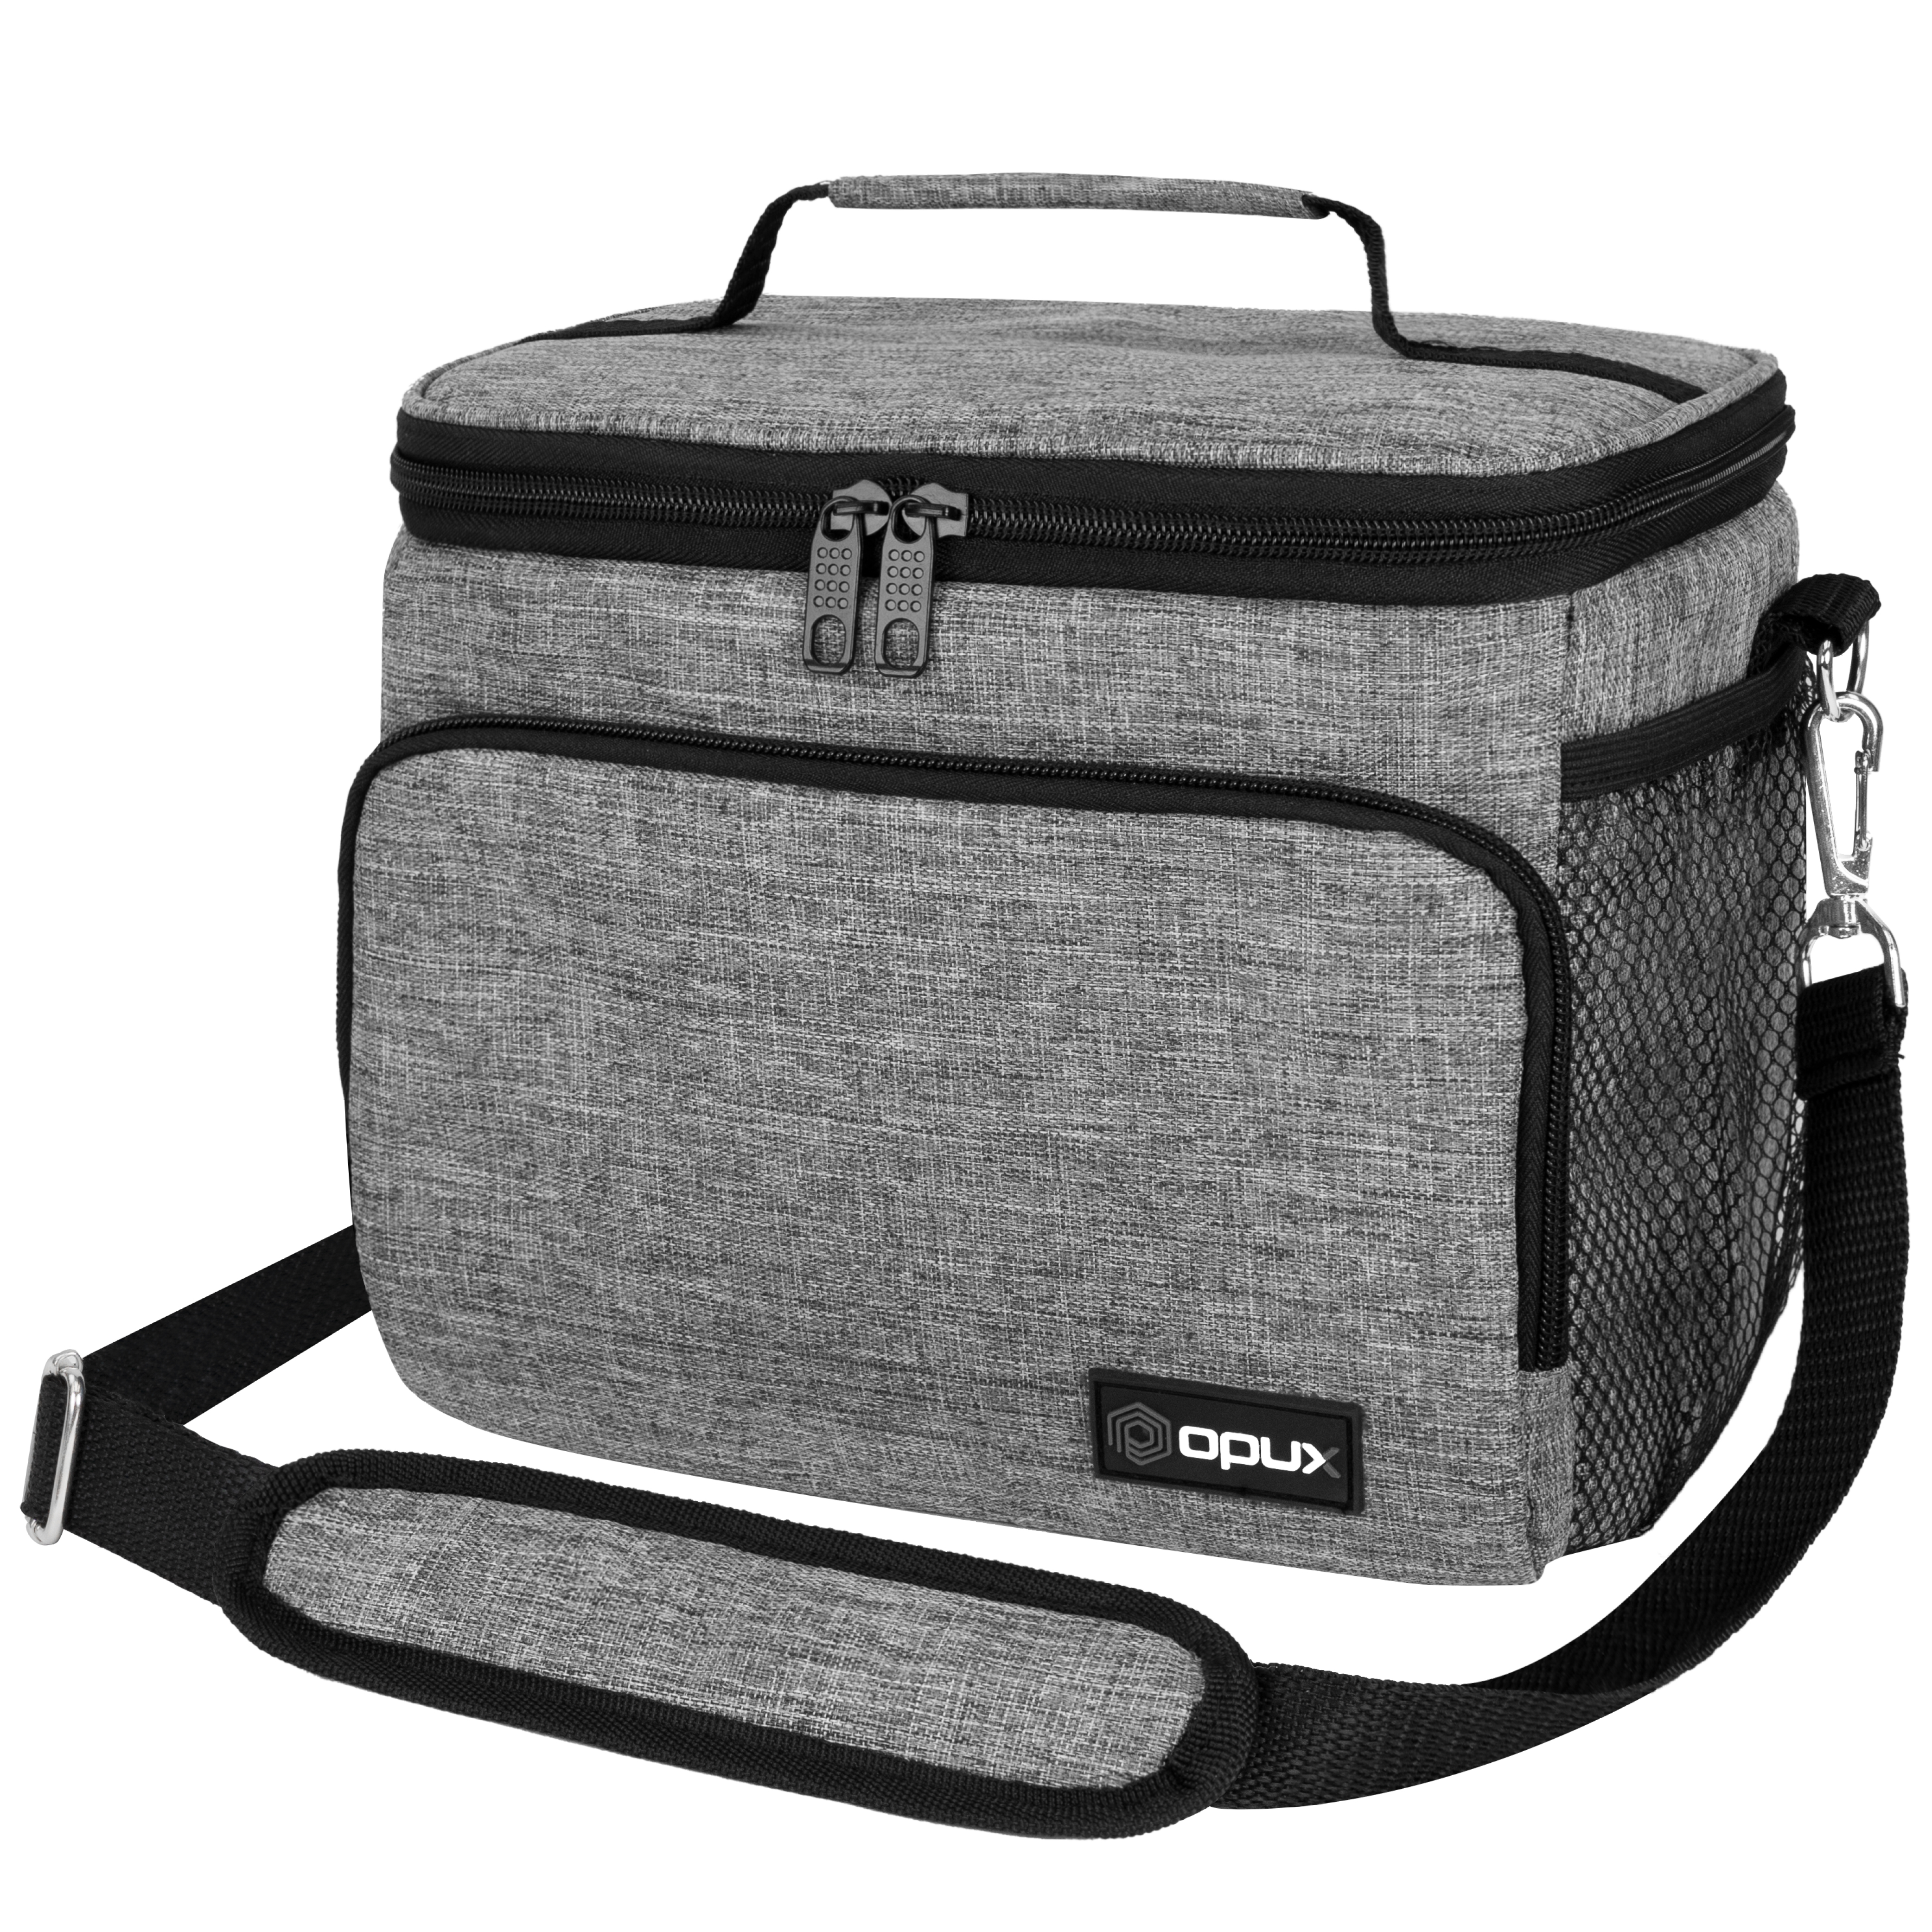 Sac à lunch isotherme Roll Top Lunch Box pour femmes hommes – MIER